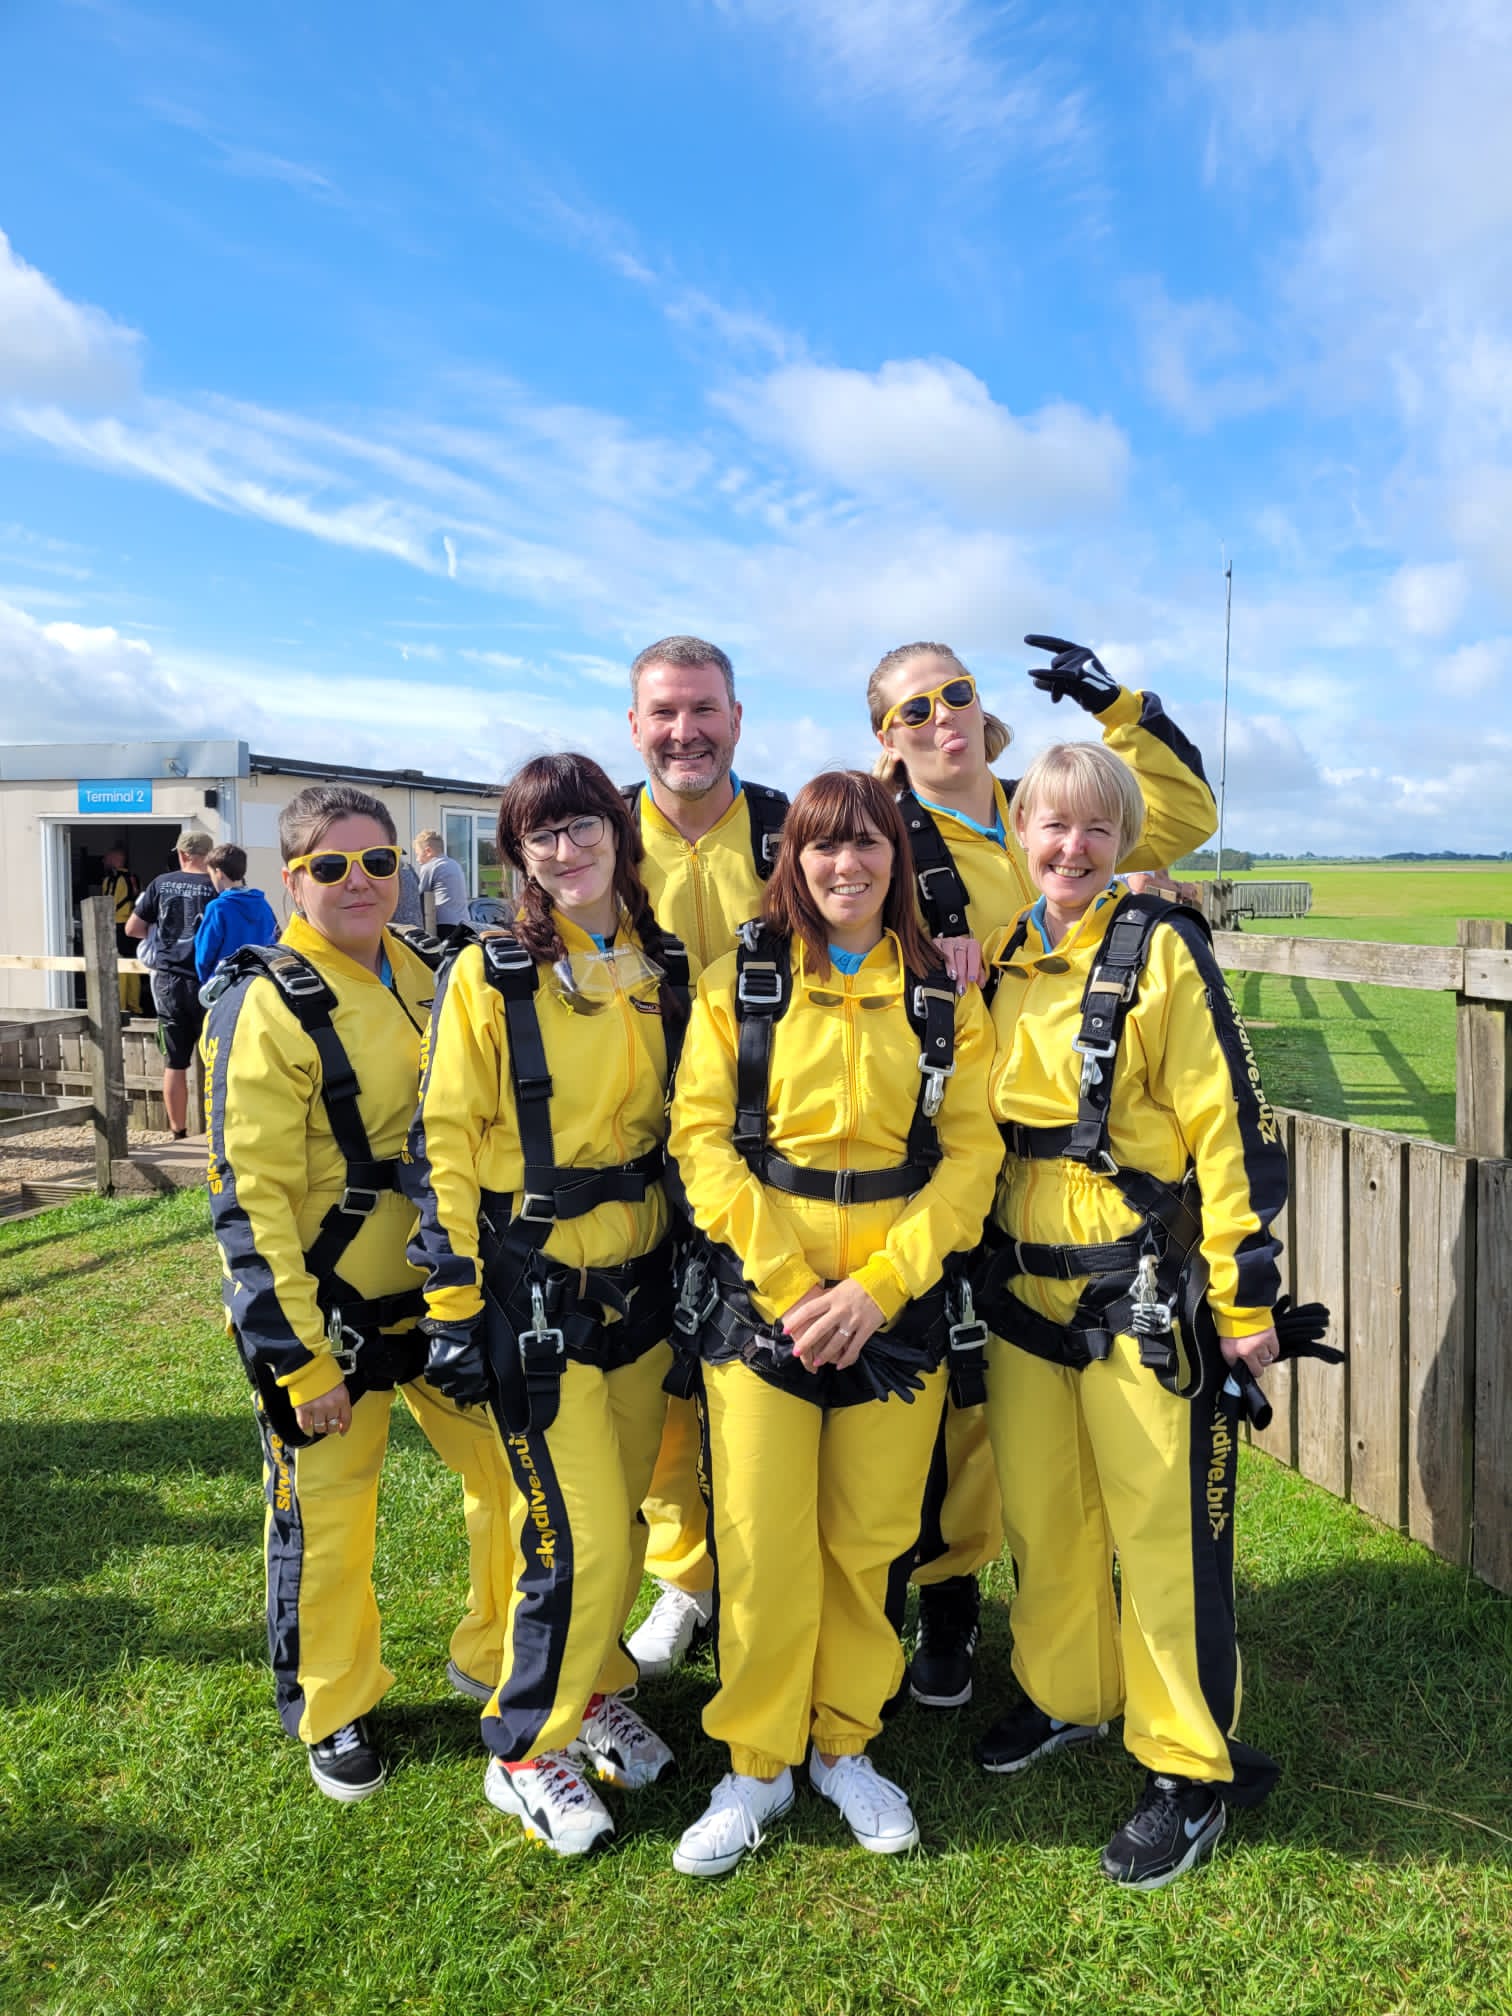 You are currently viewing Daredevil skydivers in 15,000 feet charity jump for hospice